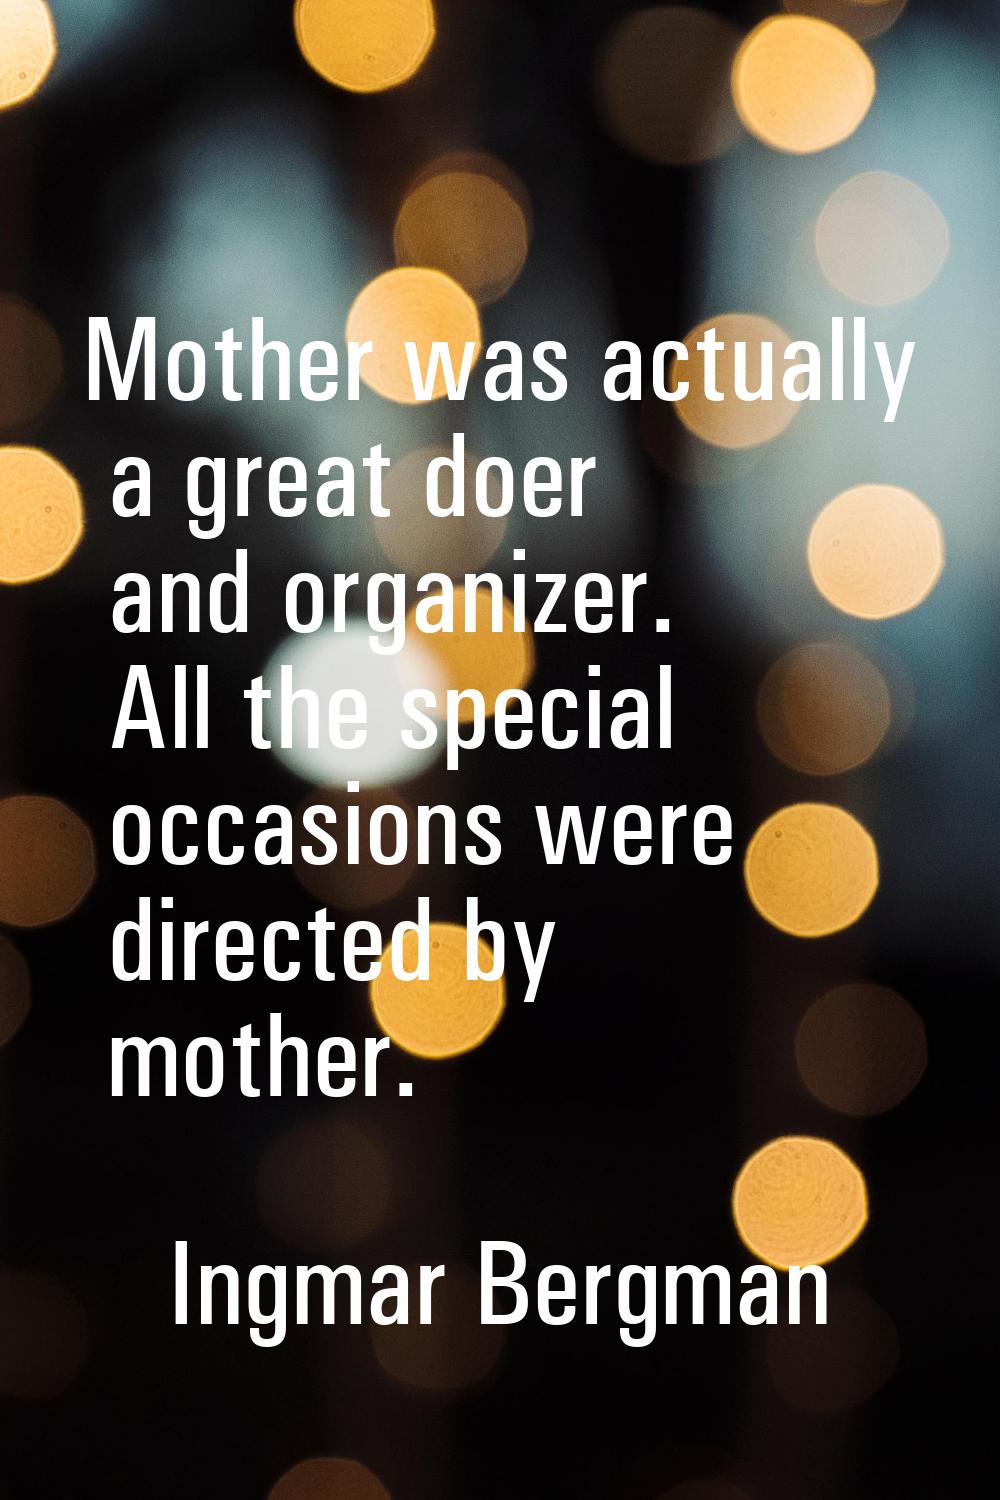 Mother was actually a great doer and organizer. All the special occasions were directed by mother.